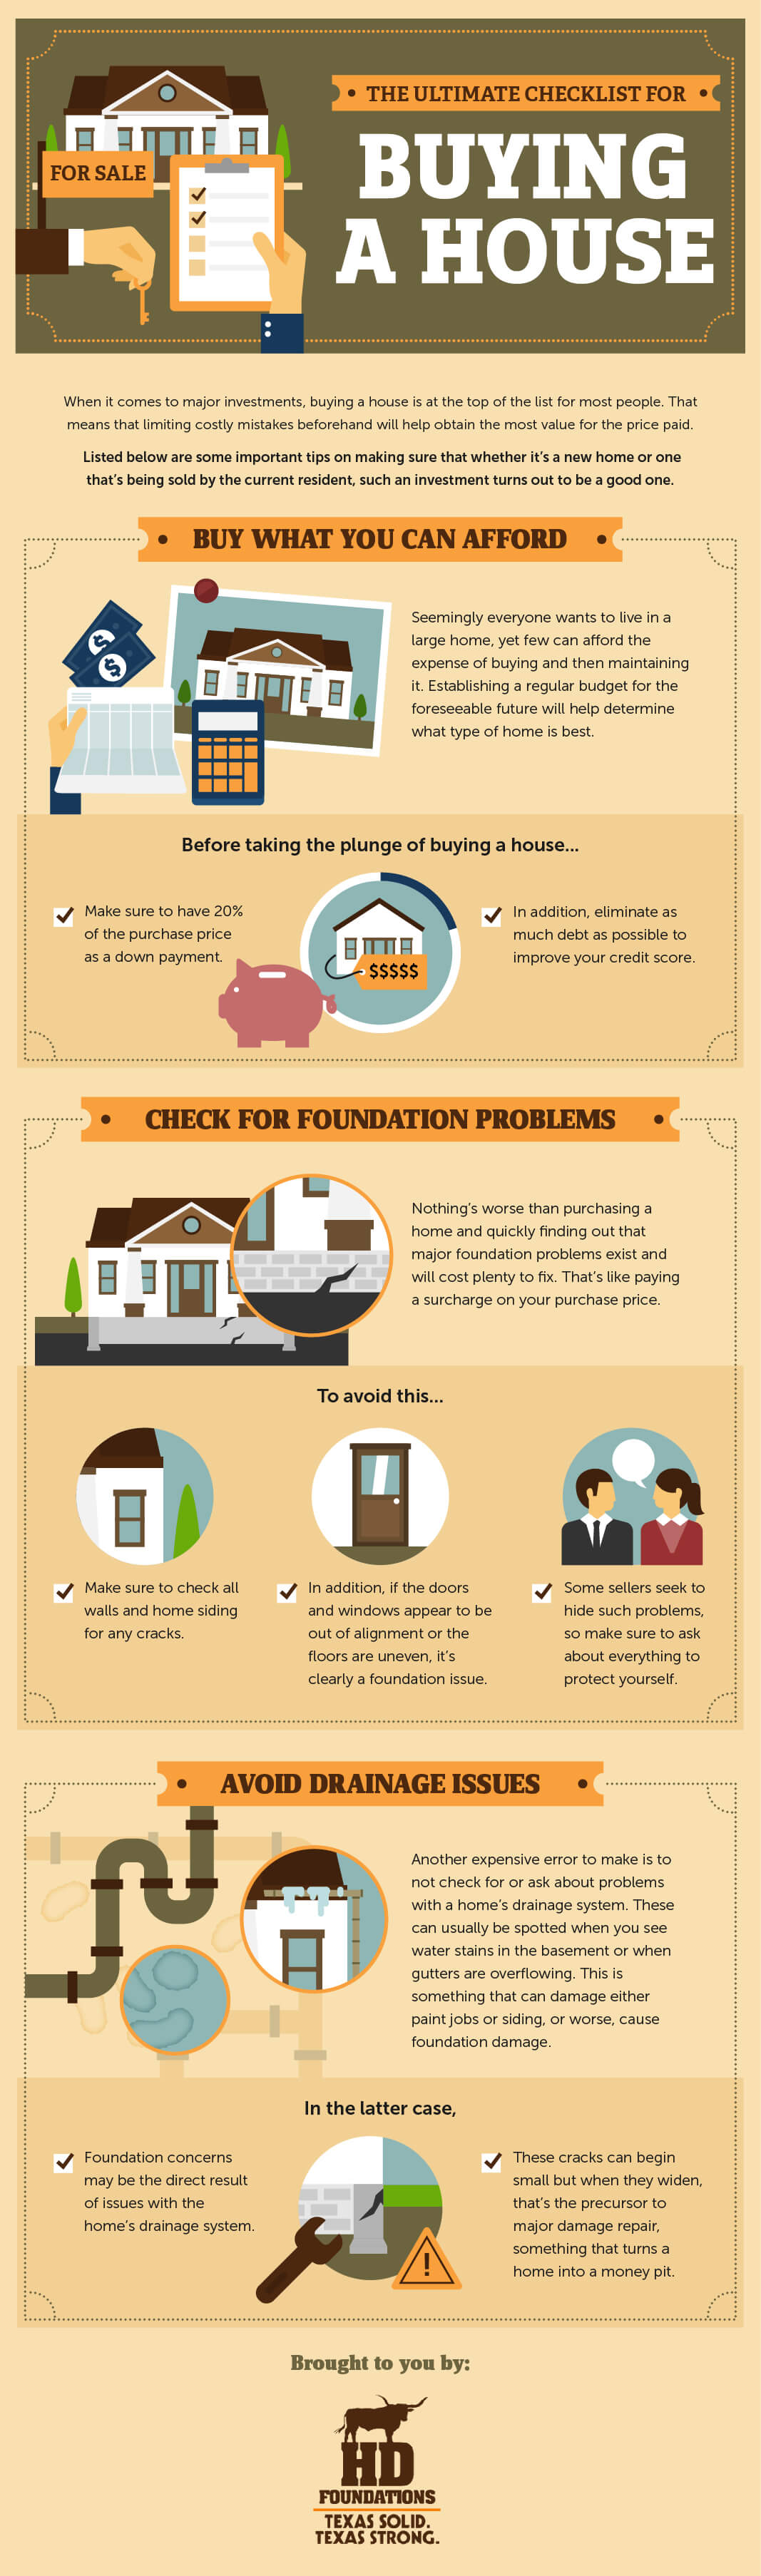 The Ultimate Checklist For Buying a House